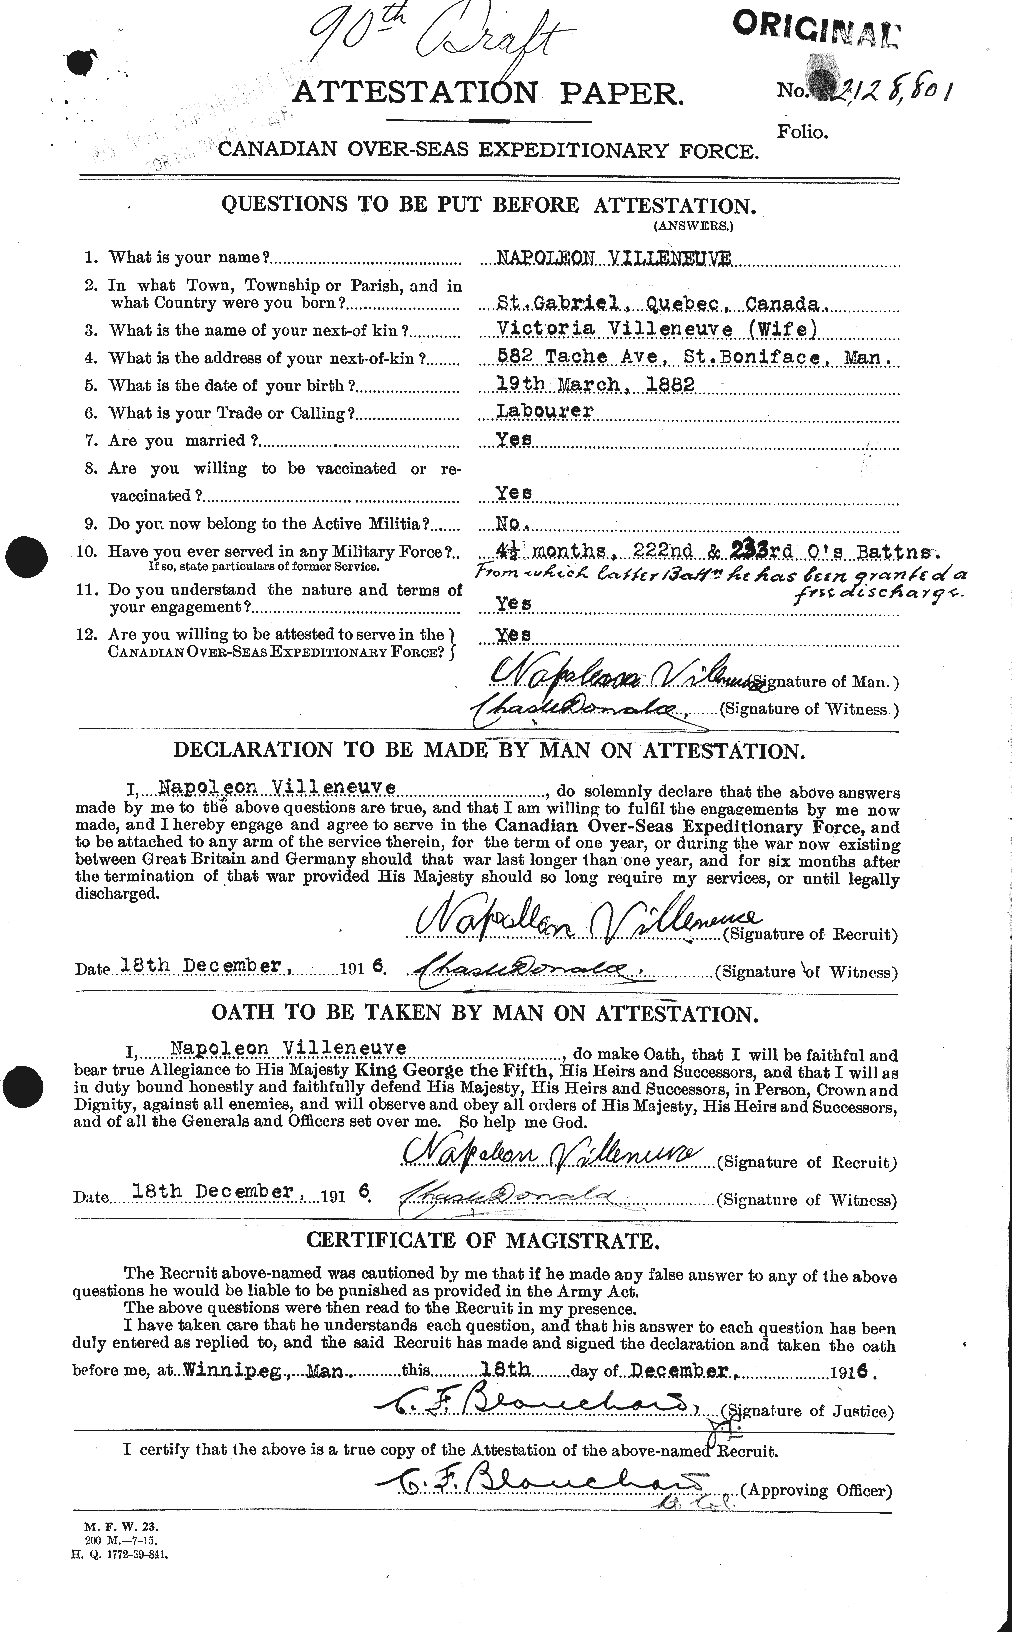 Personnel Records of the First World War - CEF 653866a